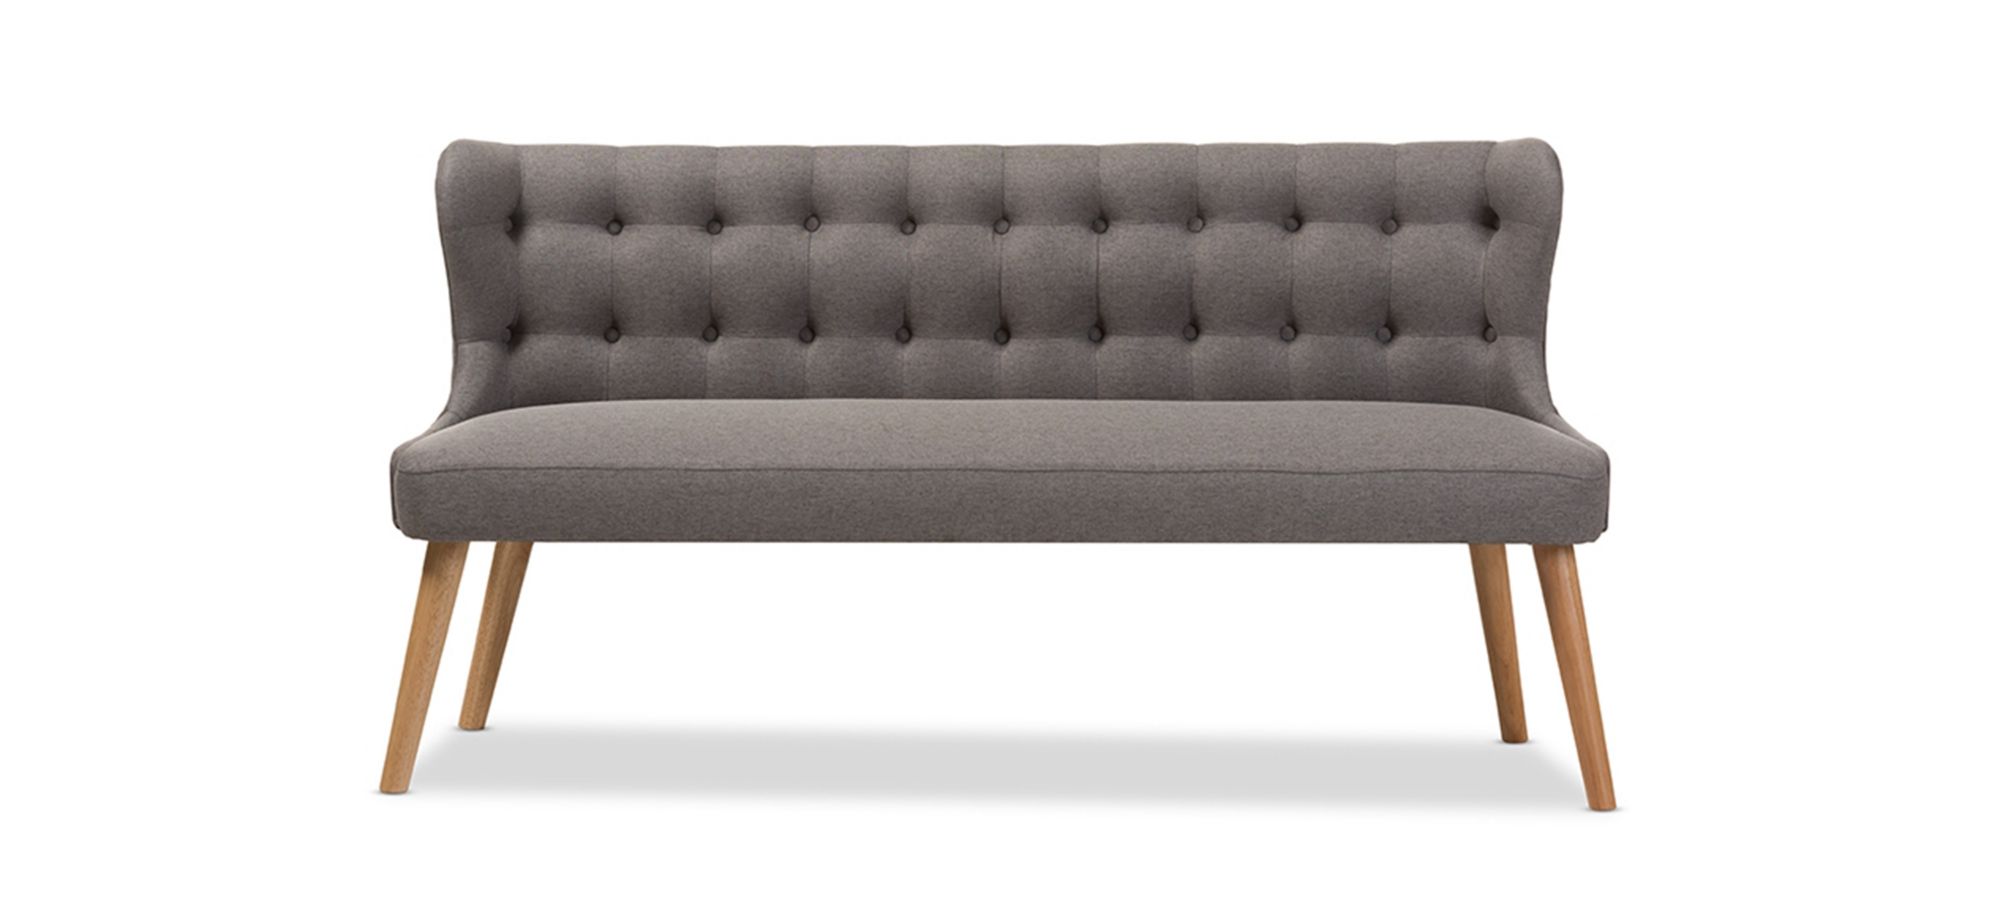 Melody Sofa in Gray by Wholesale Interiors